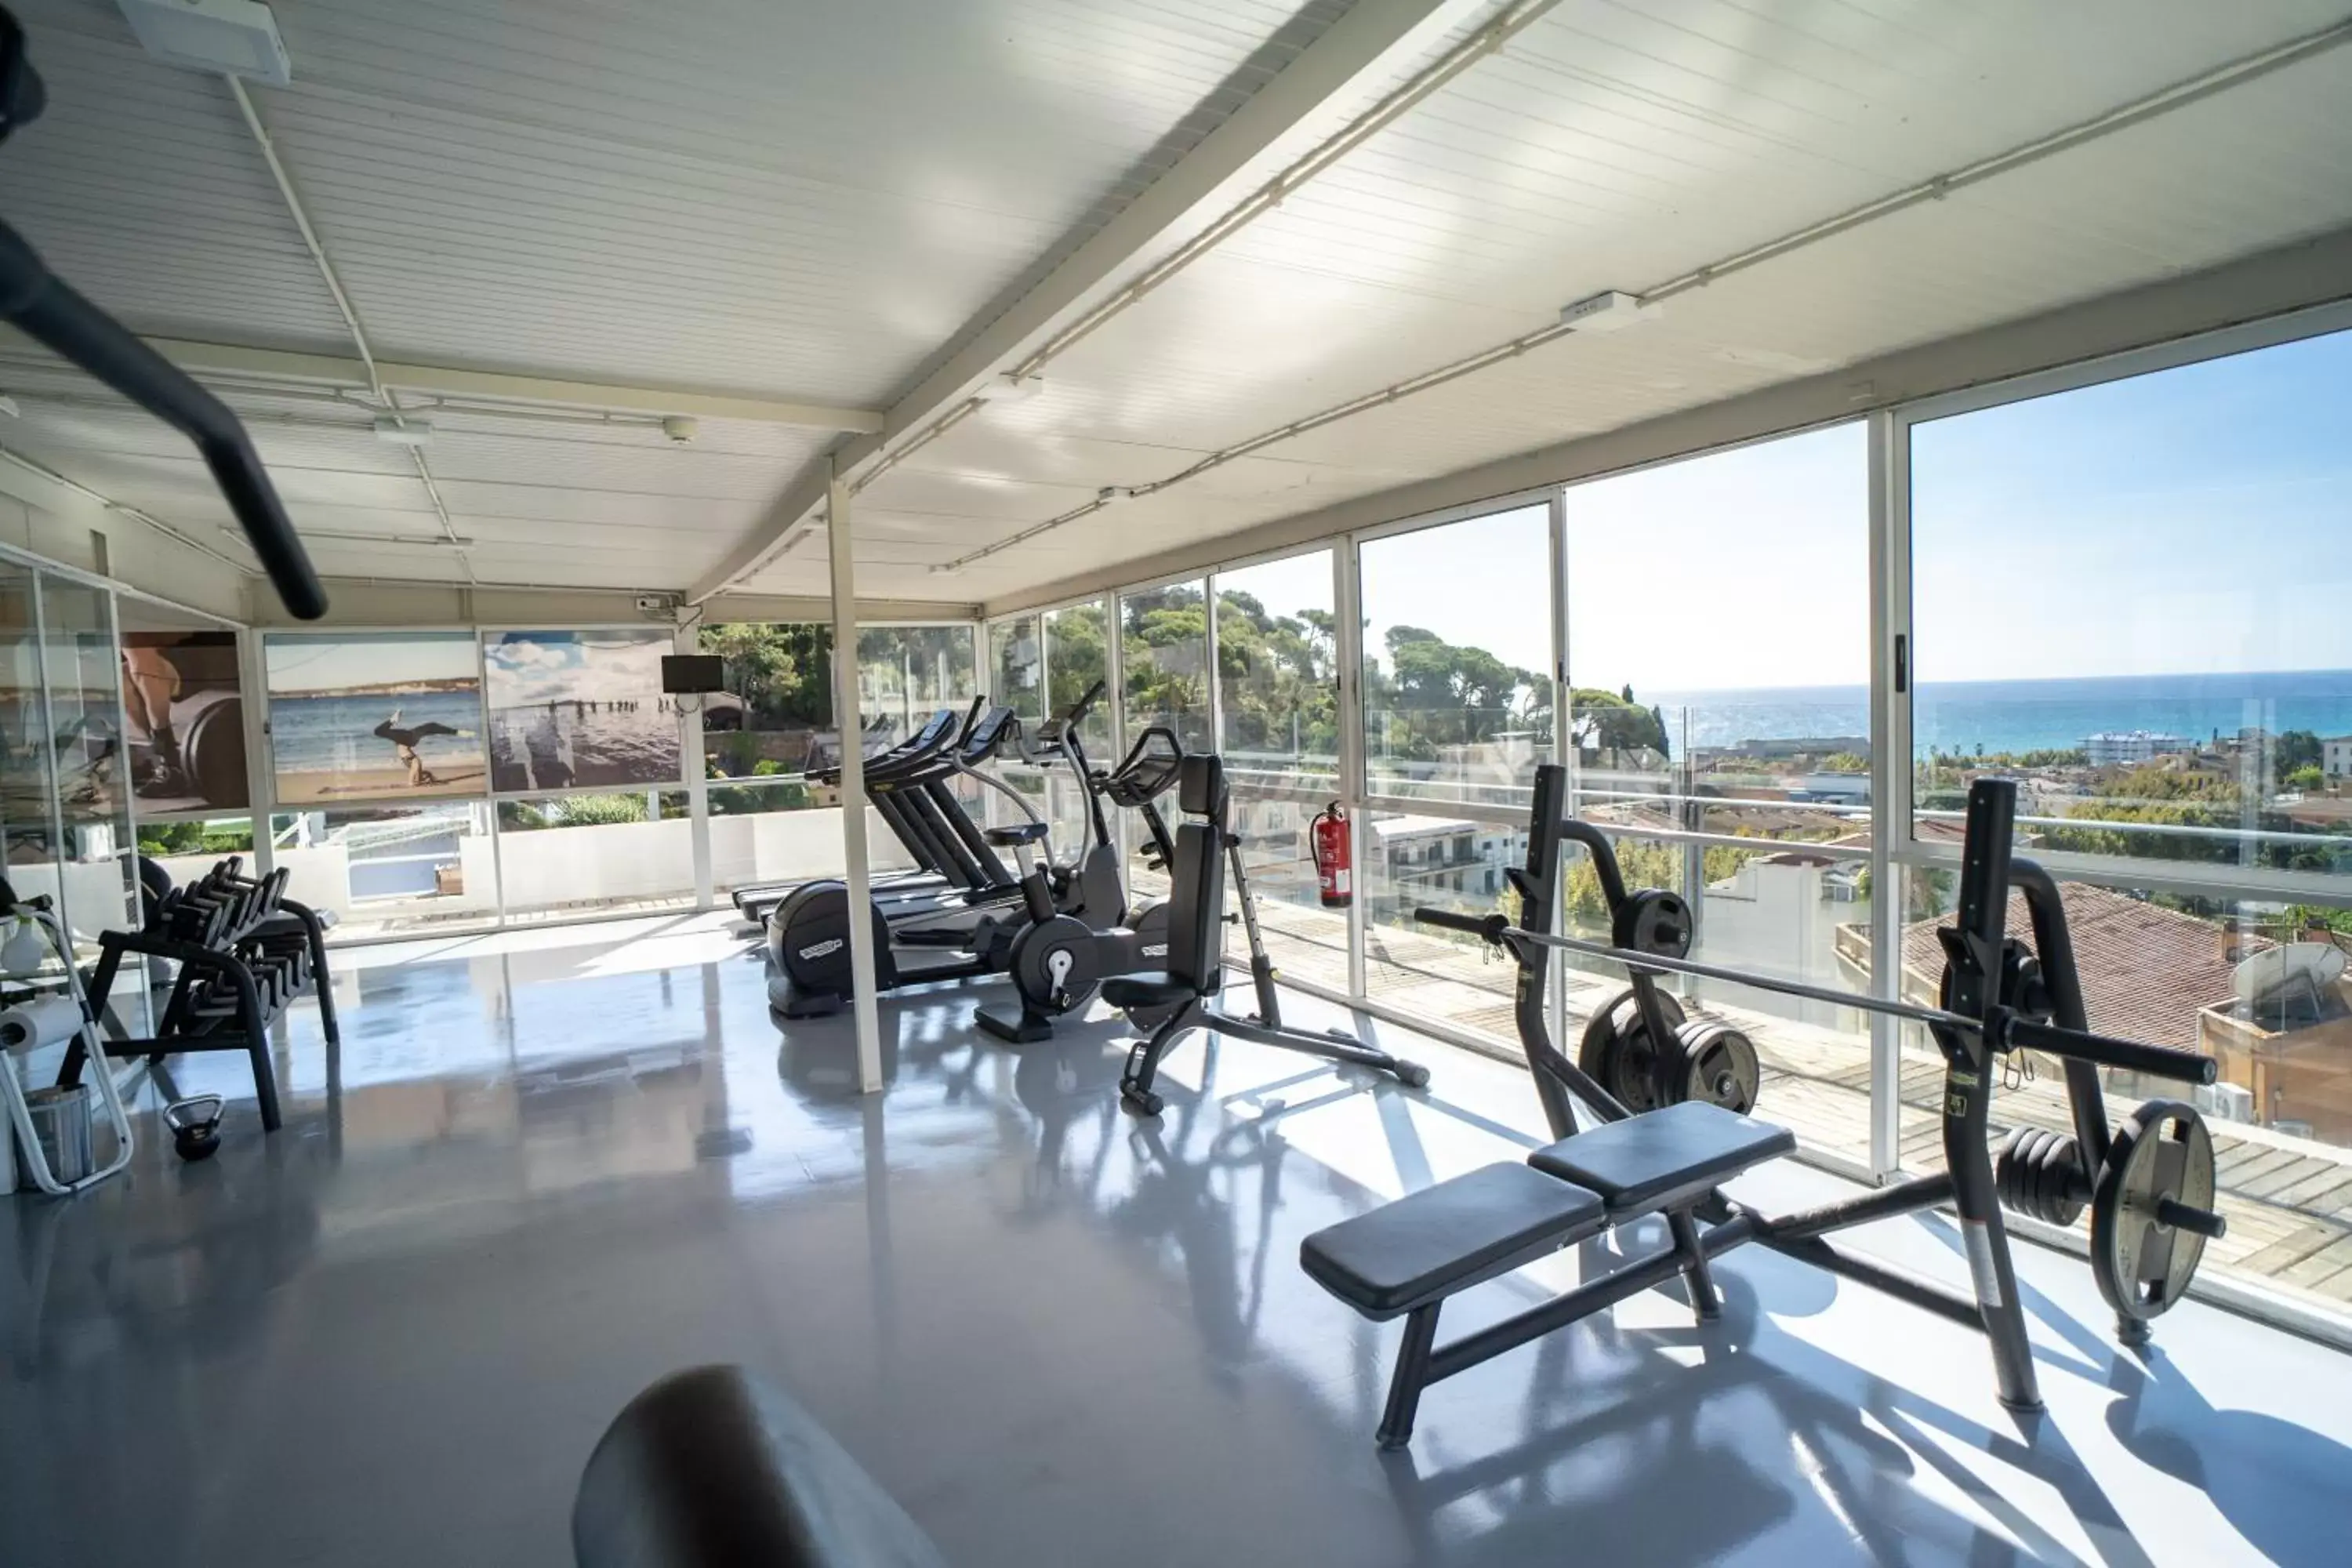 Fitness centre/facilities, Fitness Center/Facilities in Dynamic Hotels Caldetes Barcelona